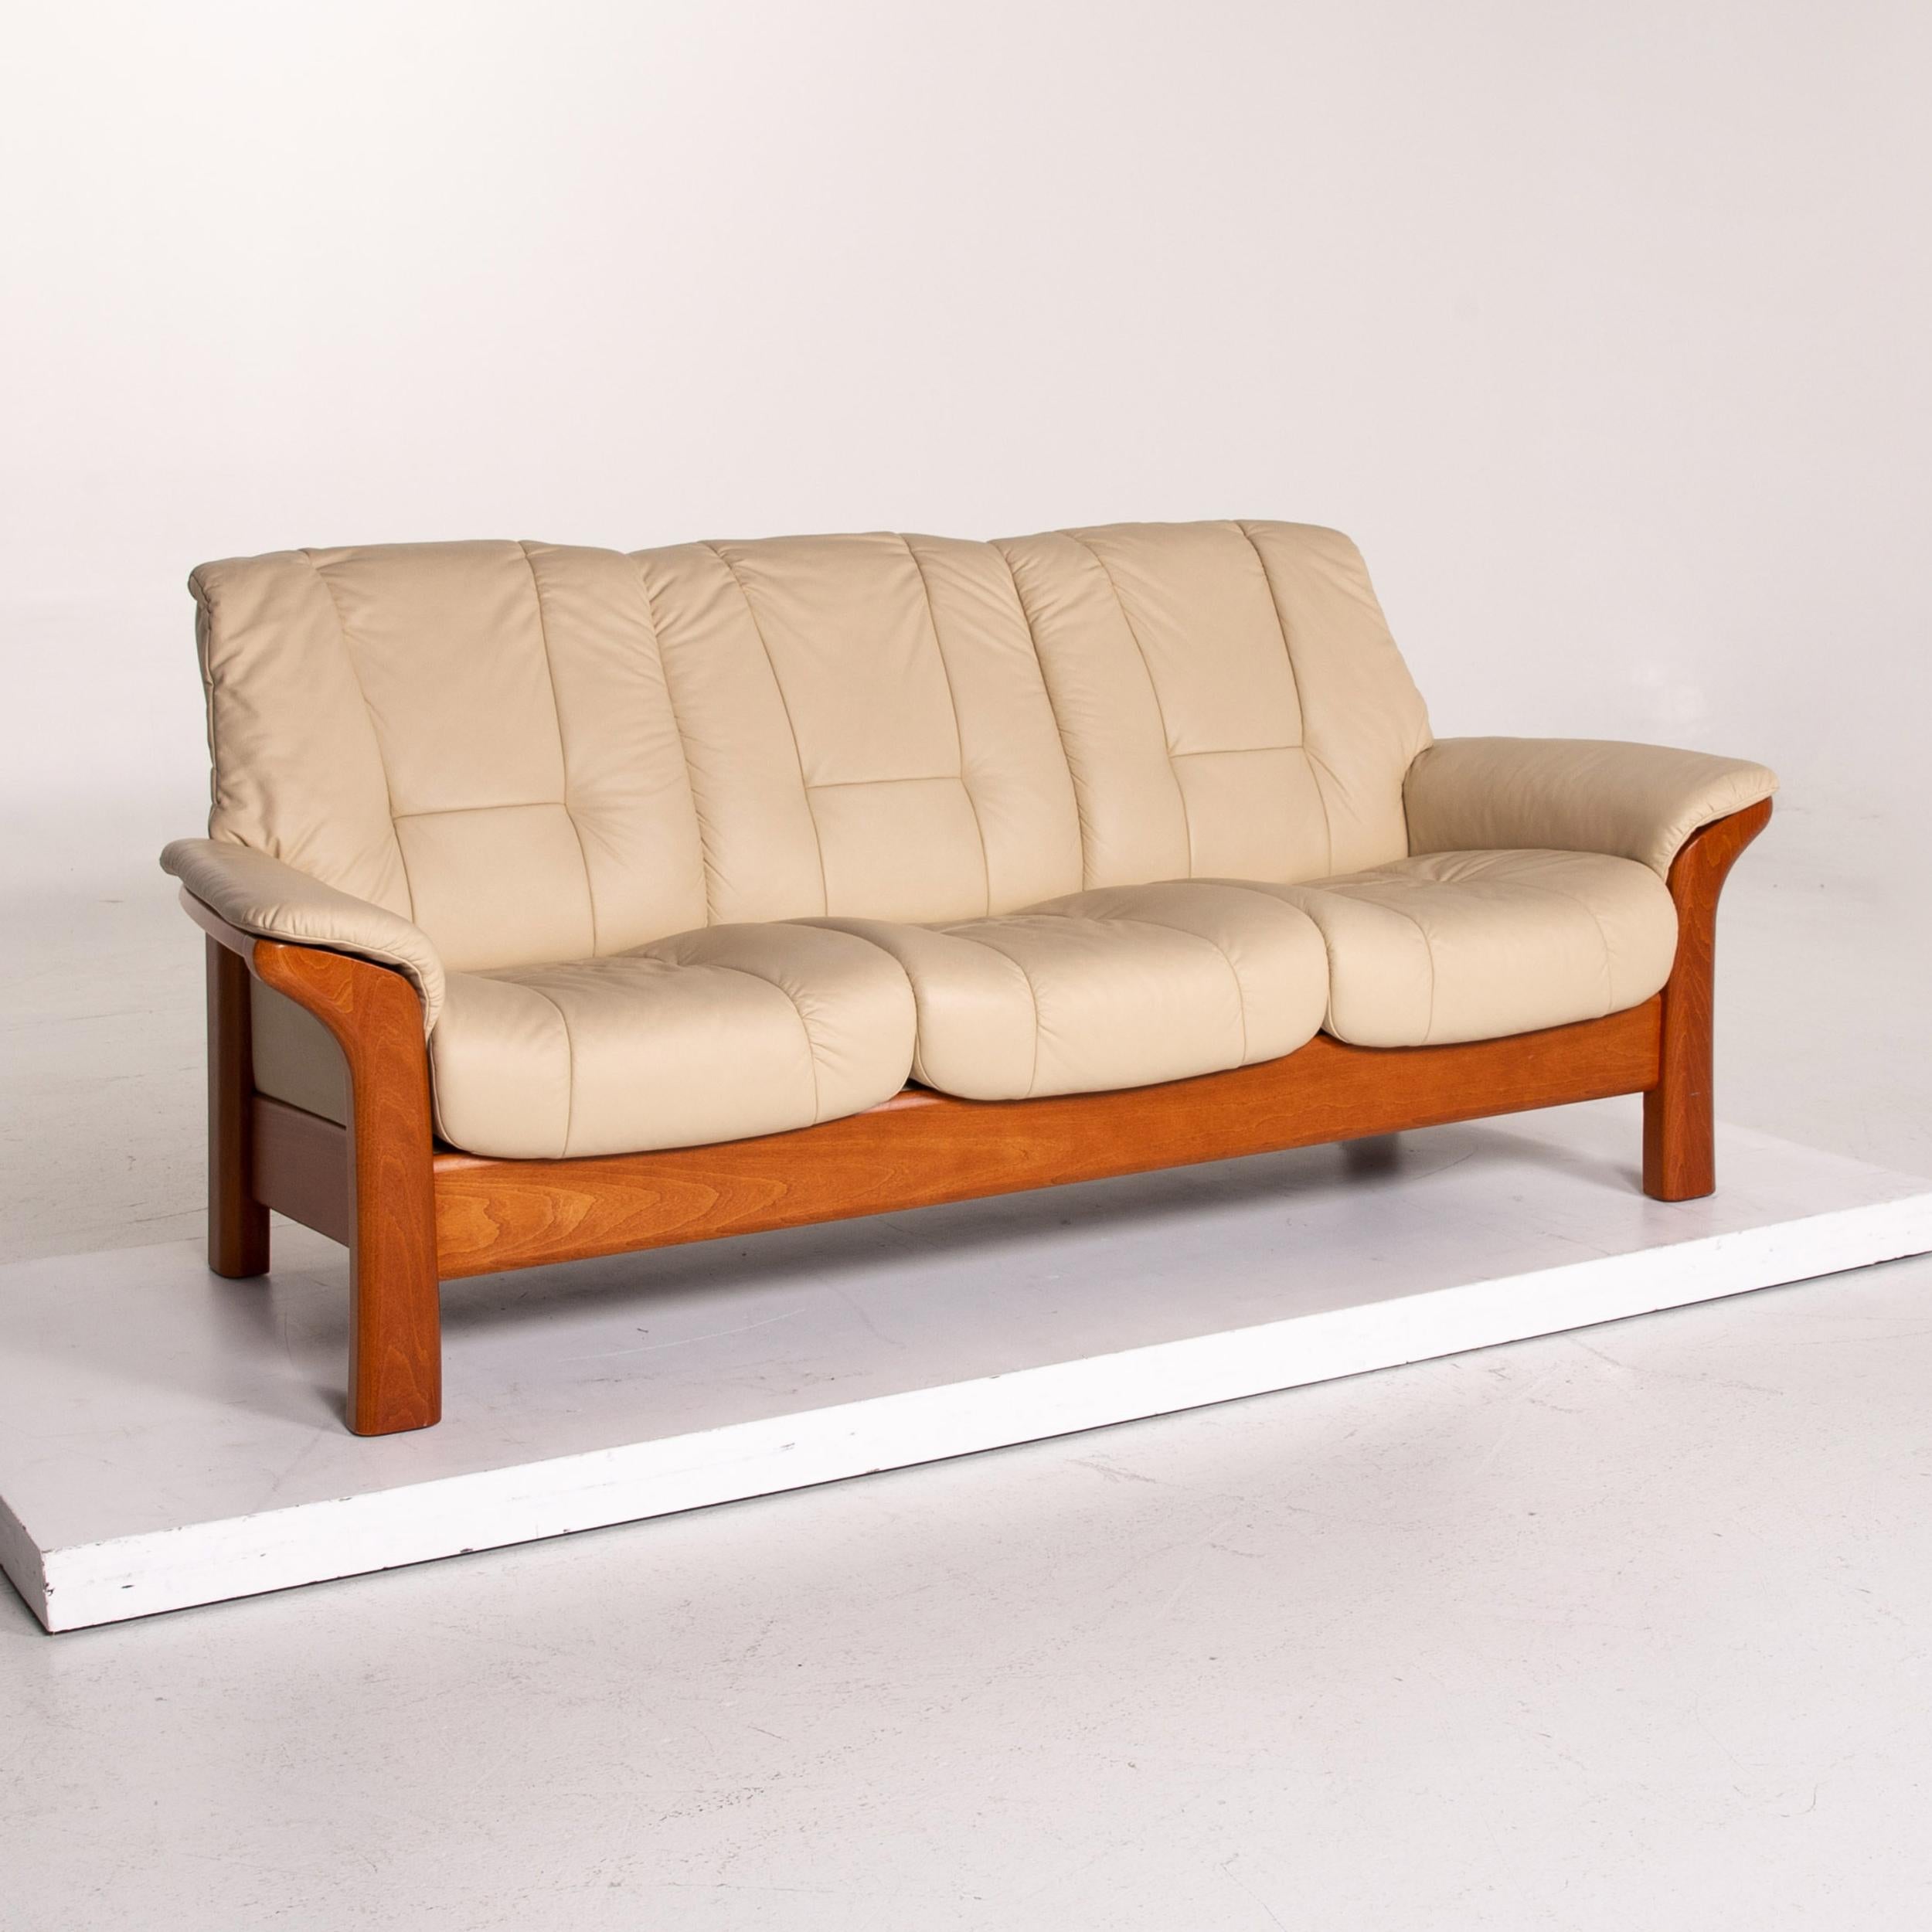 Contemporary Stressless Buckingham Leather Sofa Cream Three-Seat Feature Couch